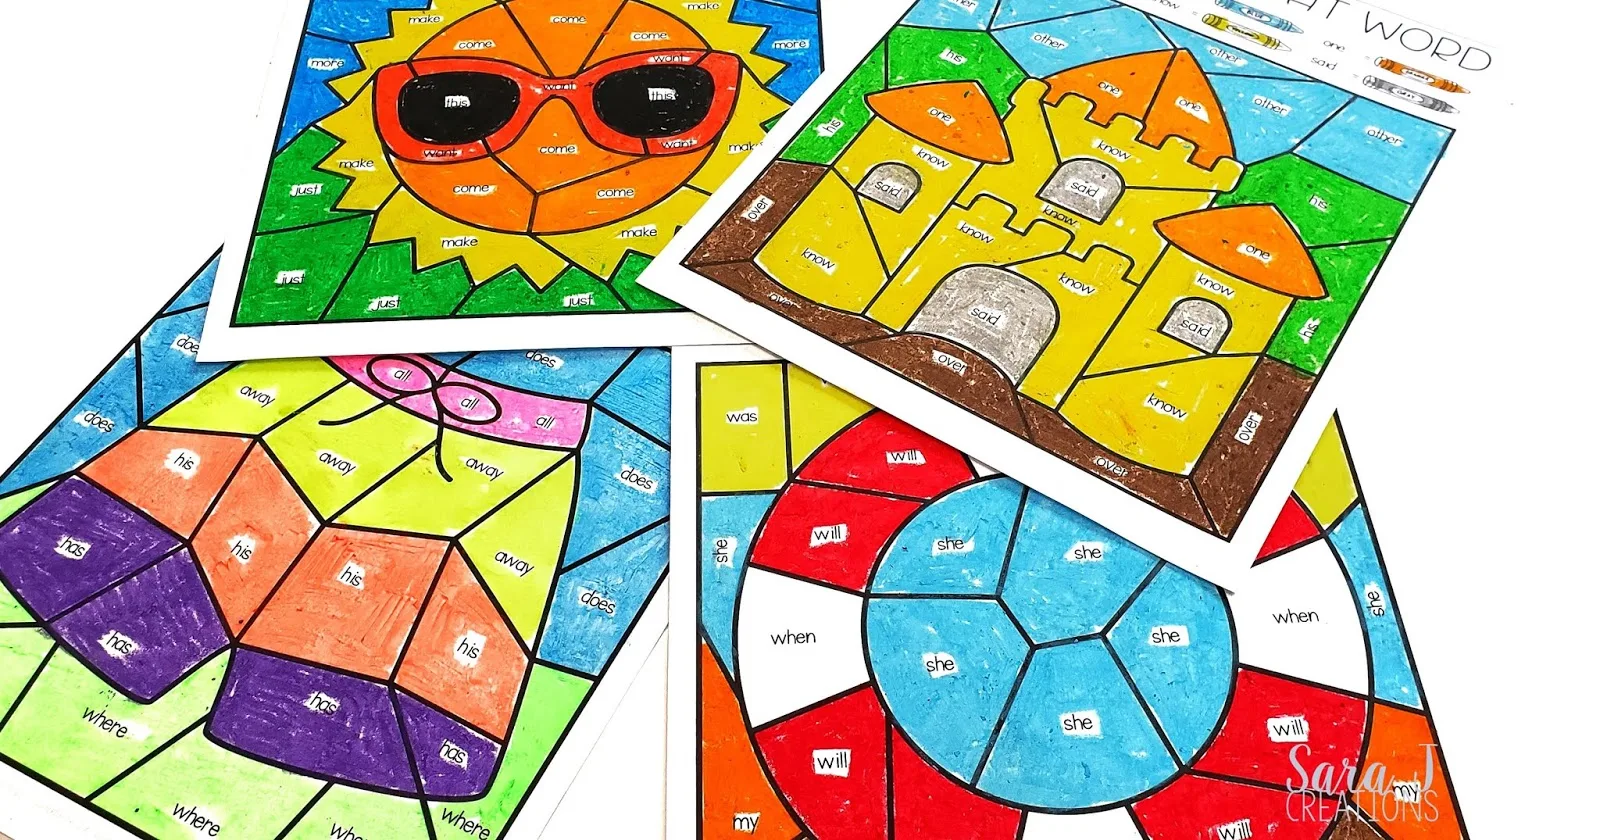 Editable Summer Color by Sight Word pages!!!! This is exactly what you need to make practicing sight words fun and meaningful for your students. You can easily differentiate for each student with a few quick clicks. No matter what sight words your students are working on, you can create personalized coloring worksheets in a snap! Includes summer and patriotic themed pictures.